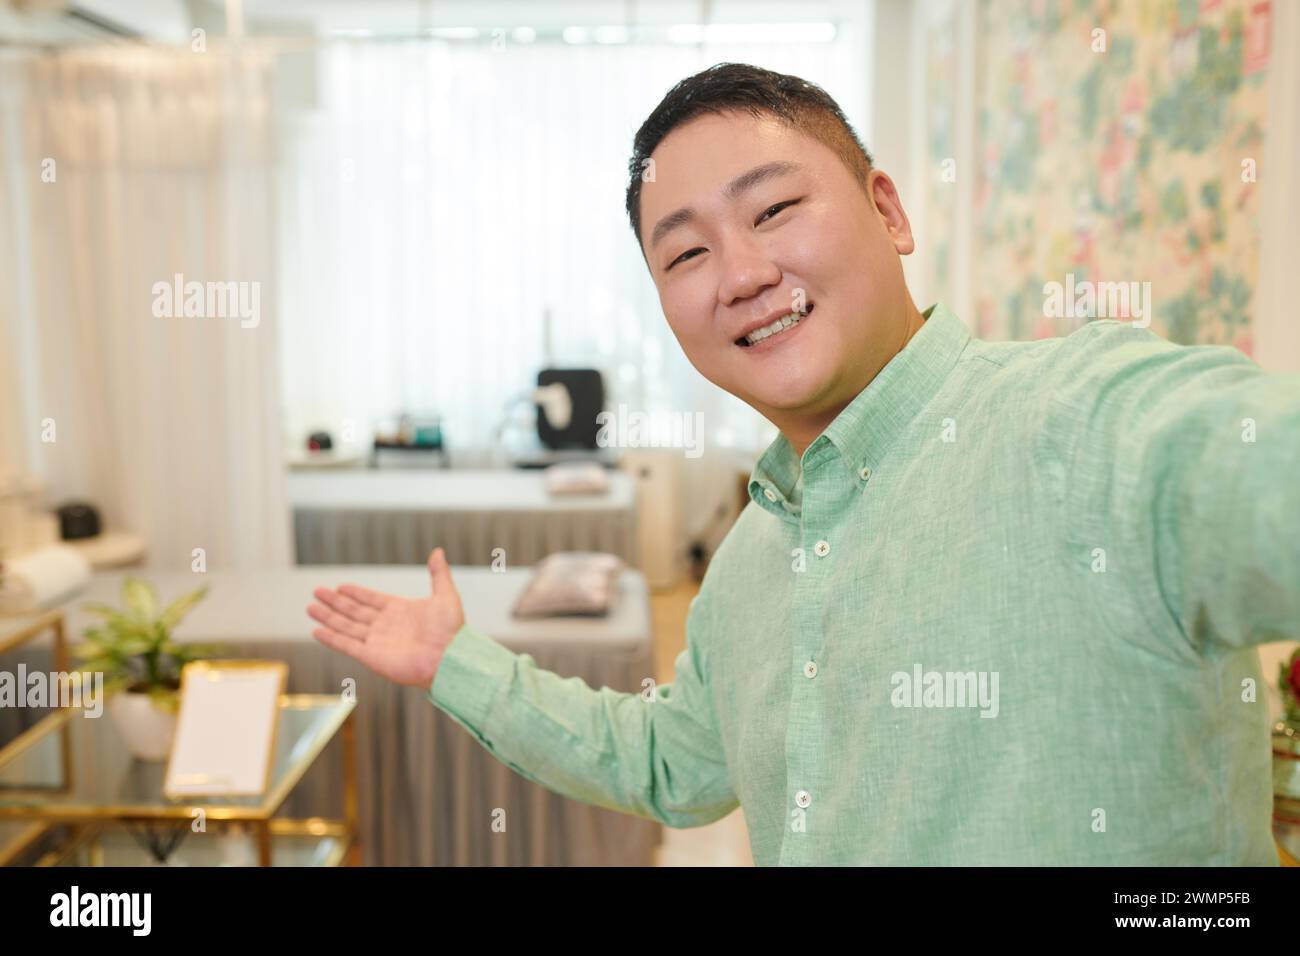 Cheerful wax salon owner filming rooms review for social media Stock Photo